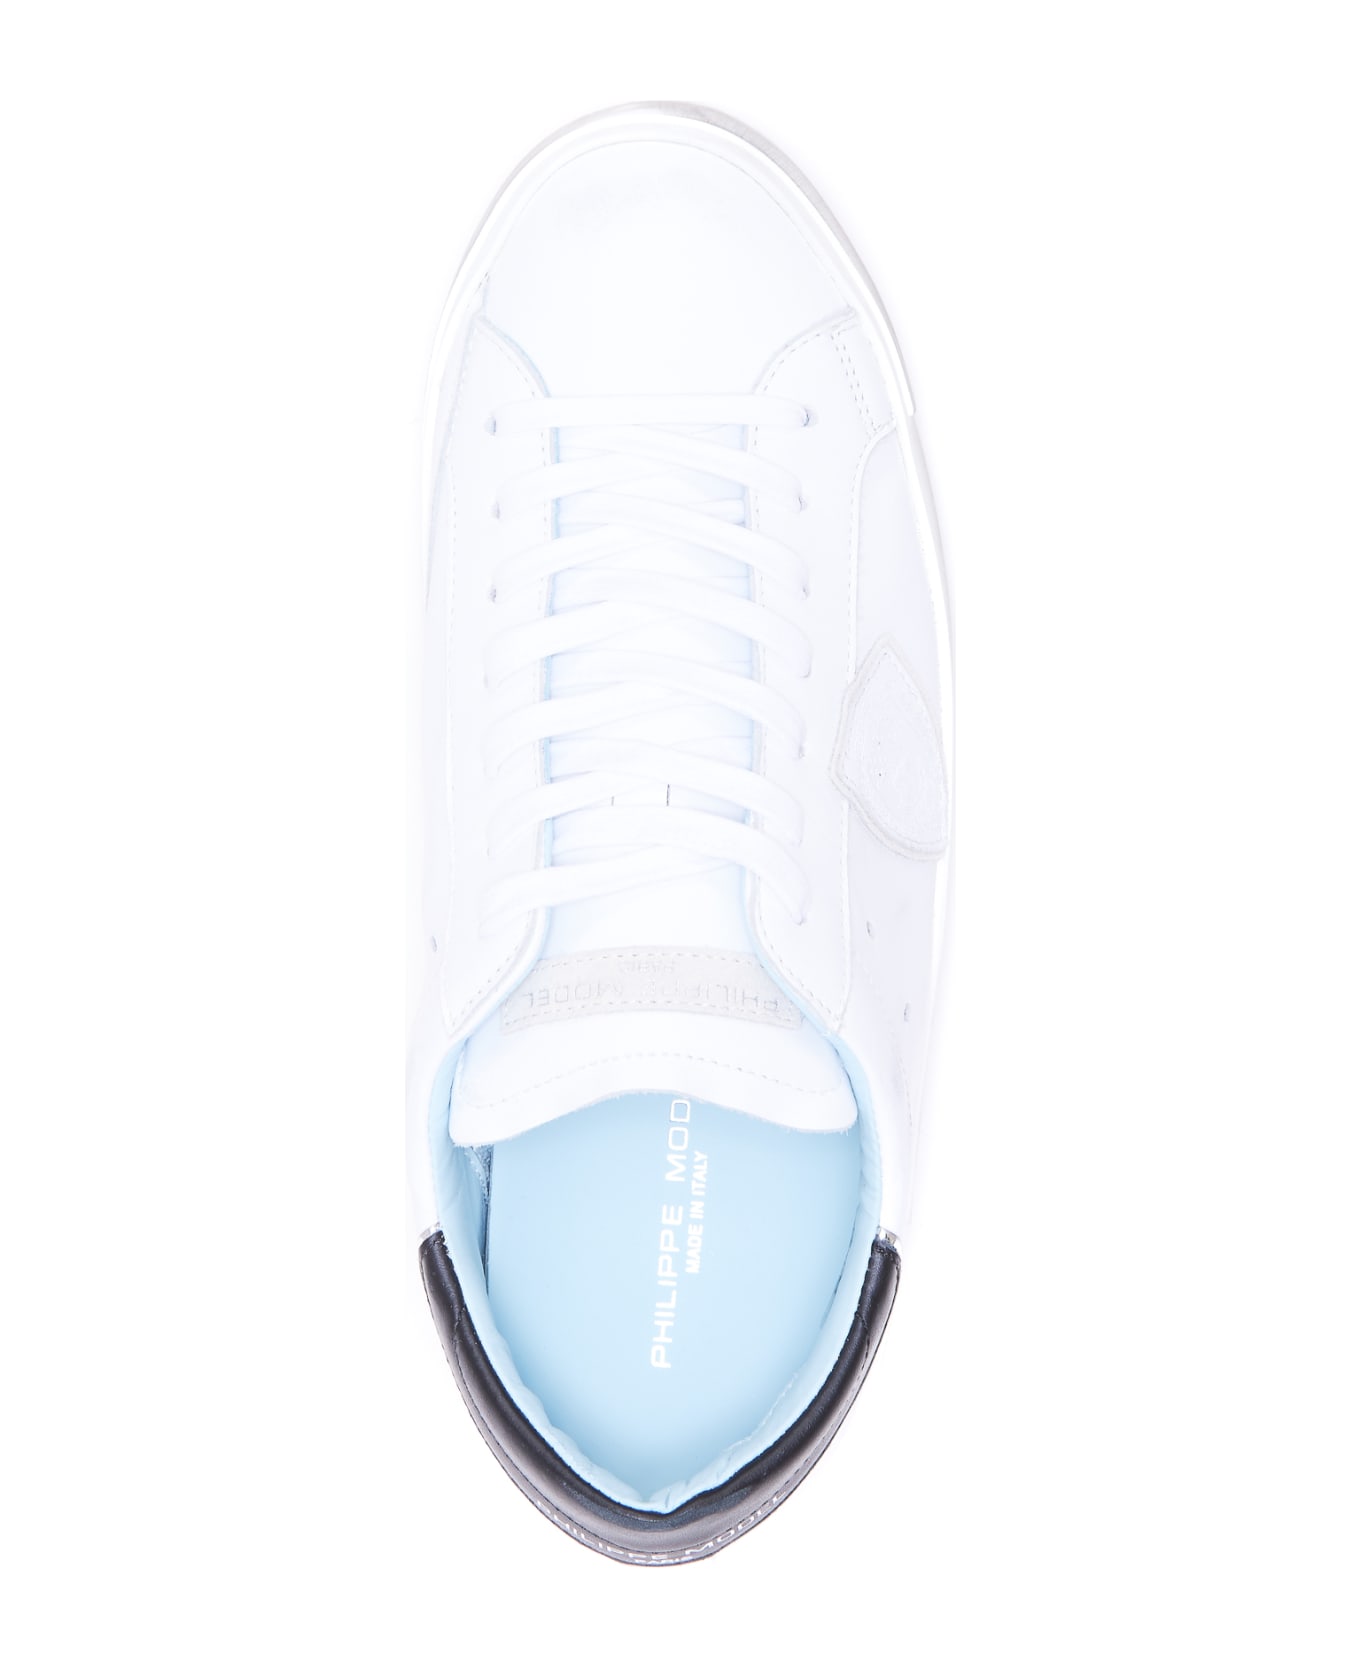 Philippe Model Prsx Low Sneakers